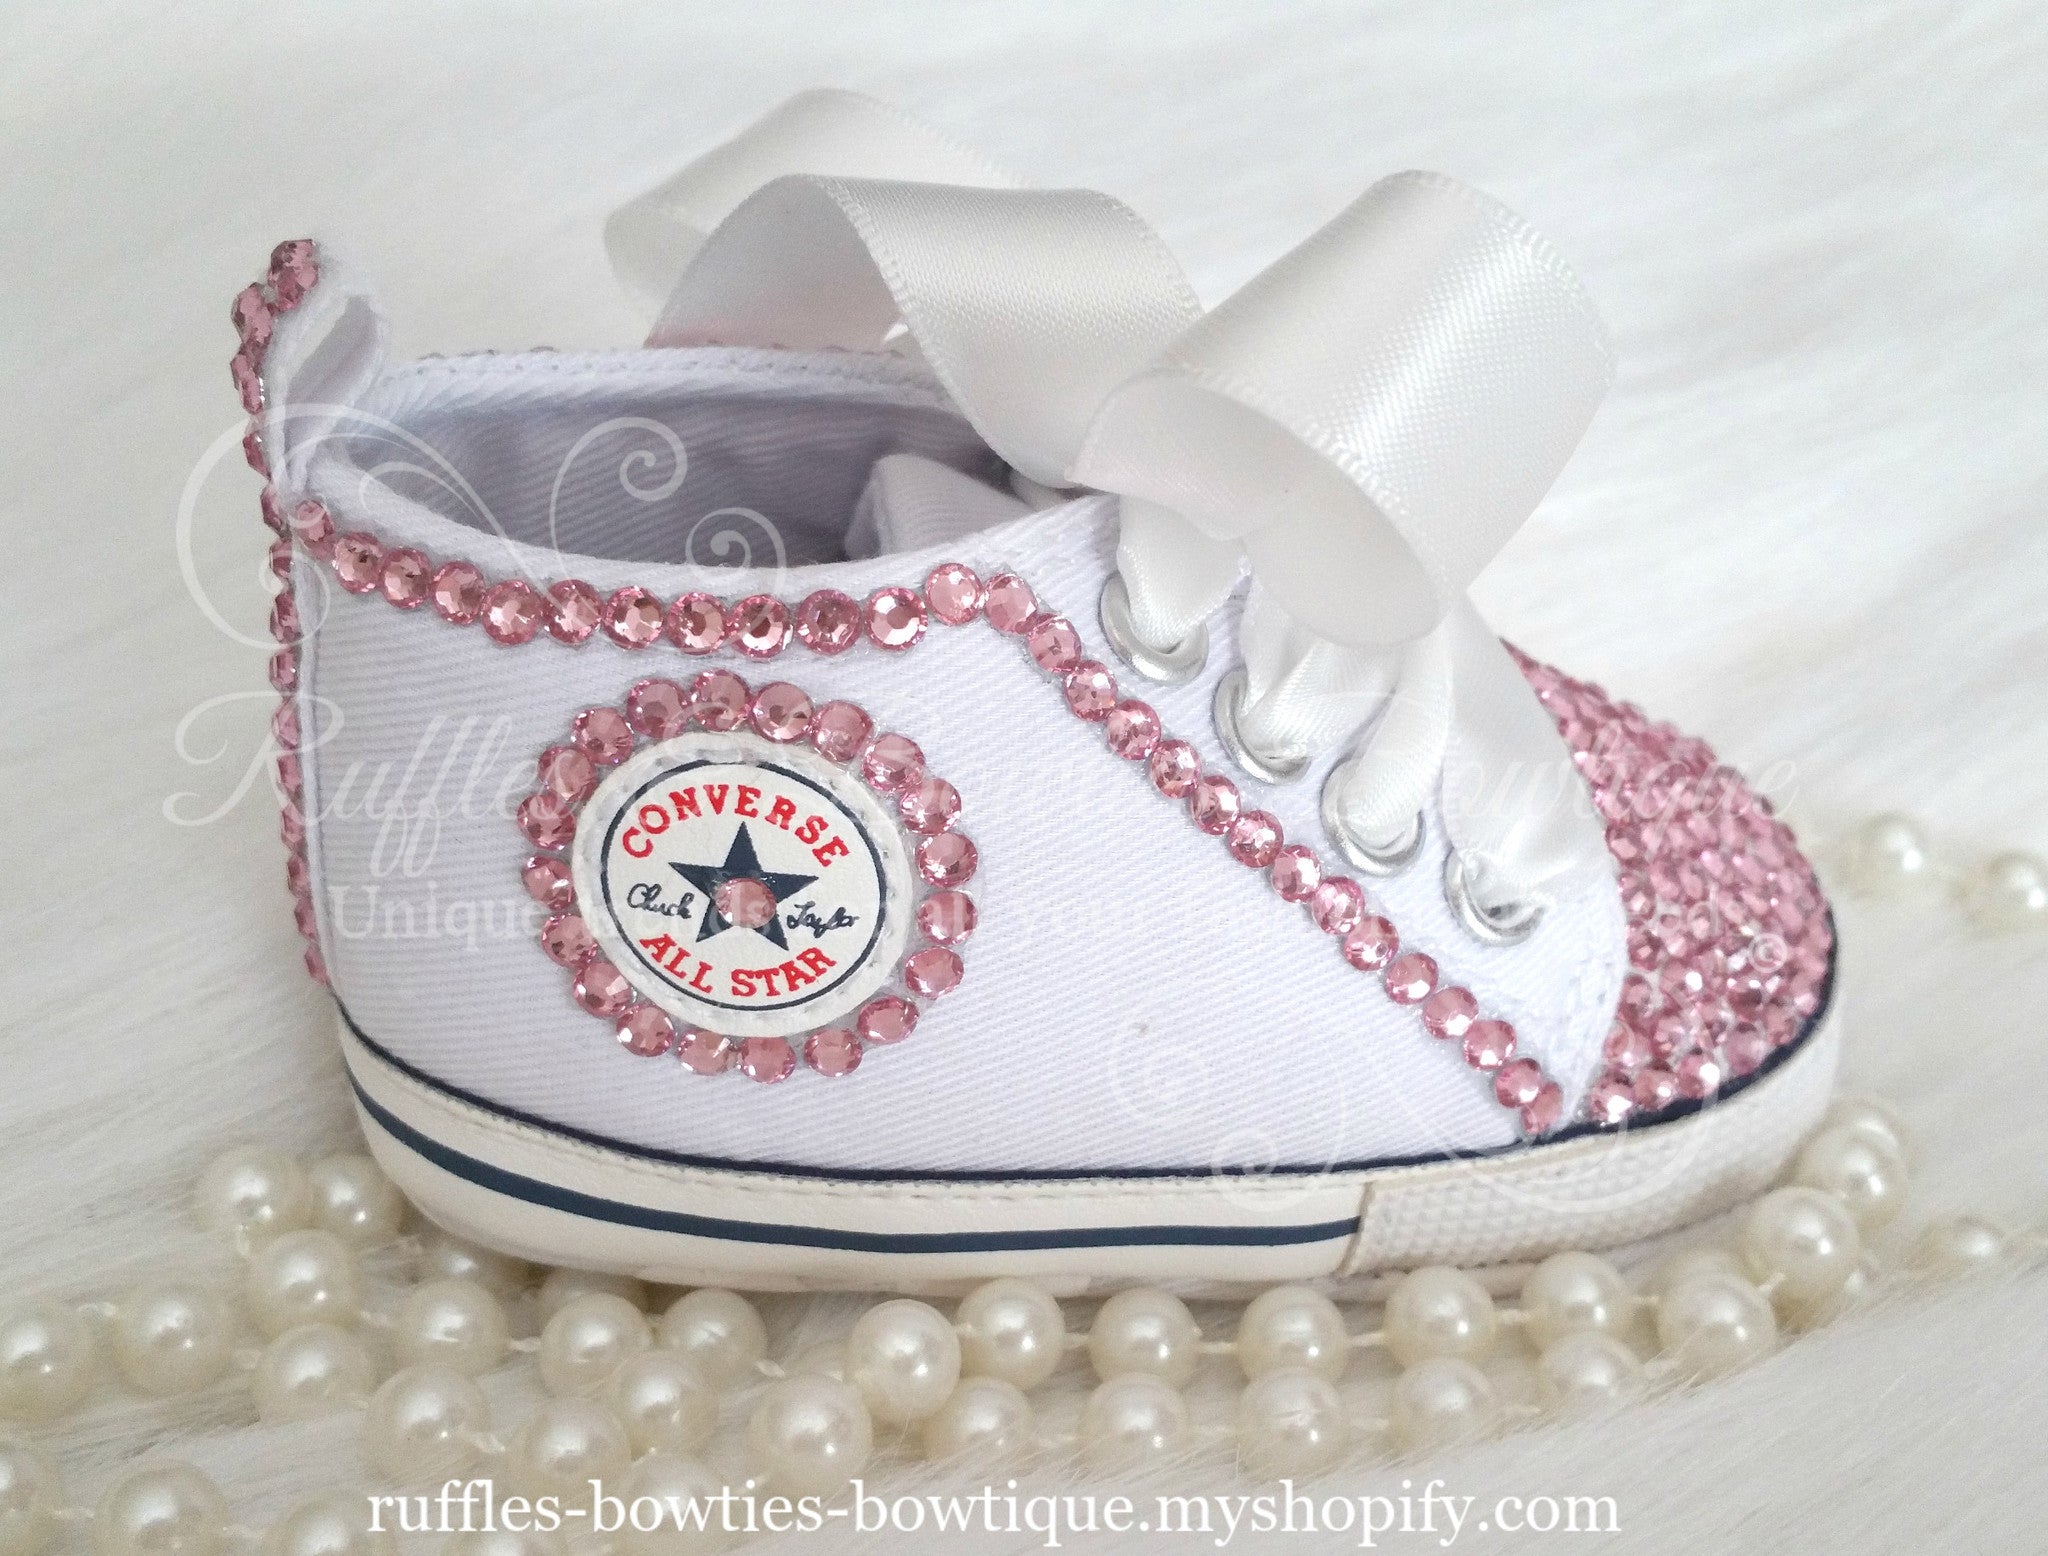 White Crystal Baby Converse High Tops - Crystal Shoes - Pre Walker Shoes - Baby Girl Shoes - Wedding - Christening - Baptism - Baby - Pink Crystals - Ruffles & Bowties Bowtique - 1